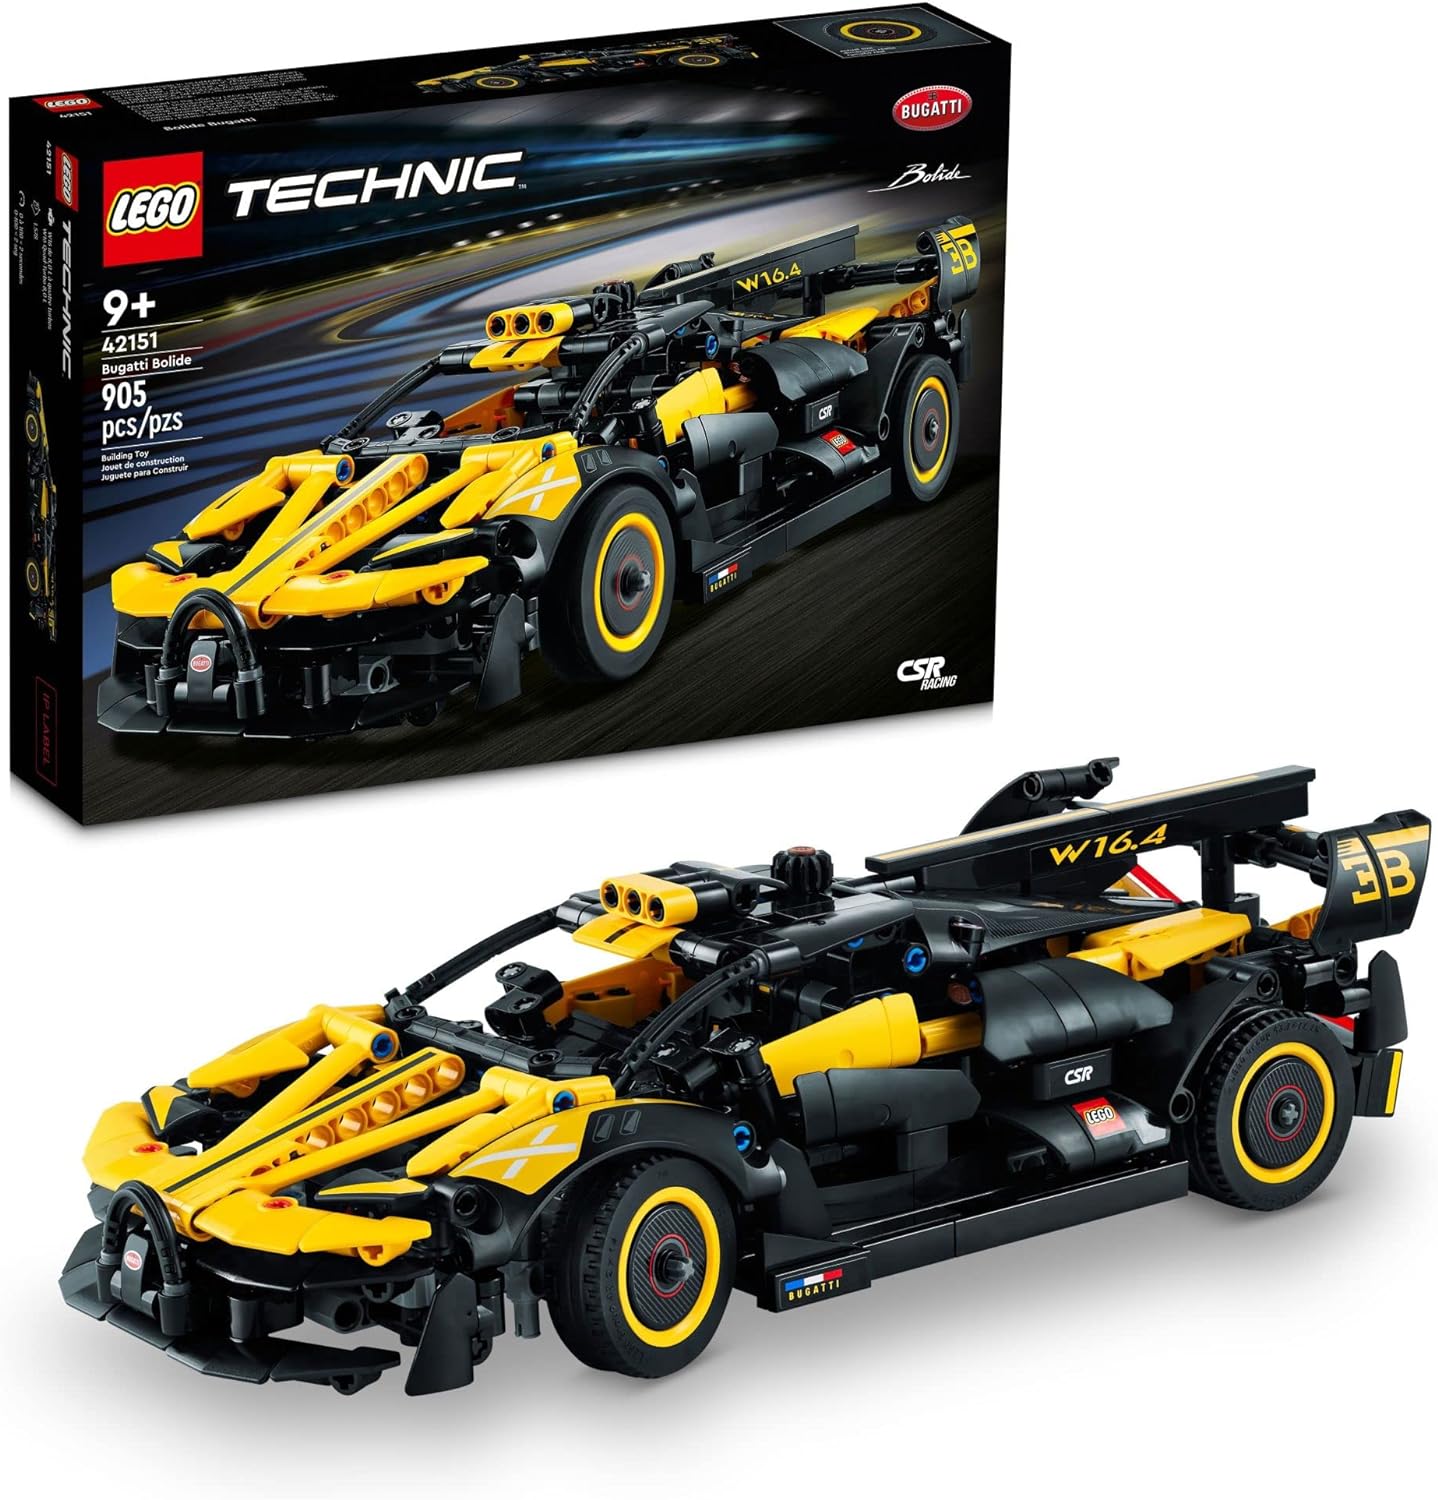 LEGO Technic Bugatti Bolide Racing Car Building Set - Model and Race Engineering Toy for Back to School, Collectible Sports Car Construction Kit for Boys, Girls, and Teen - $39.99